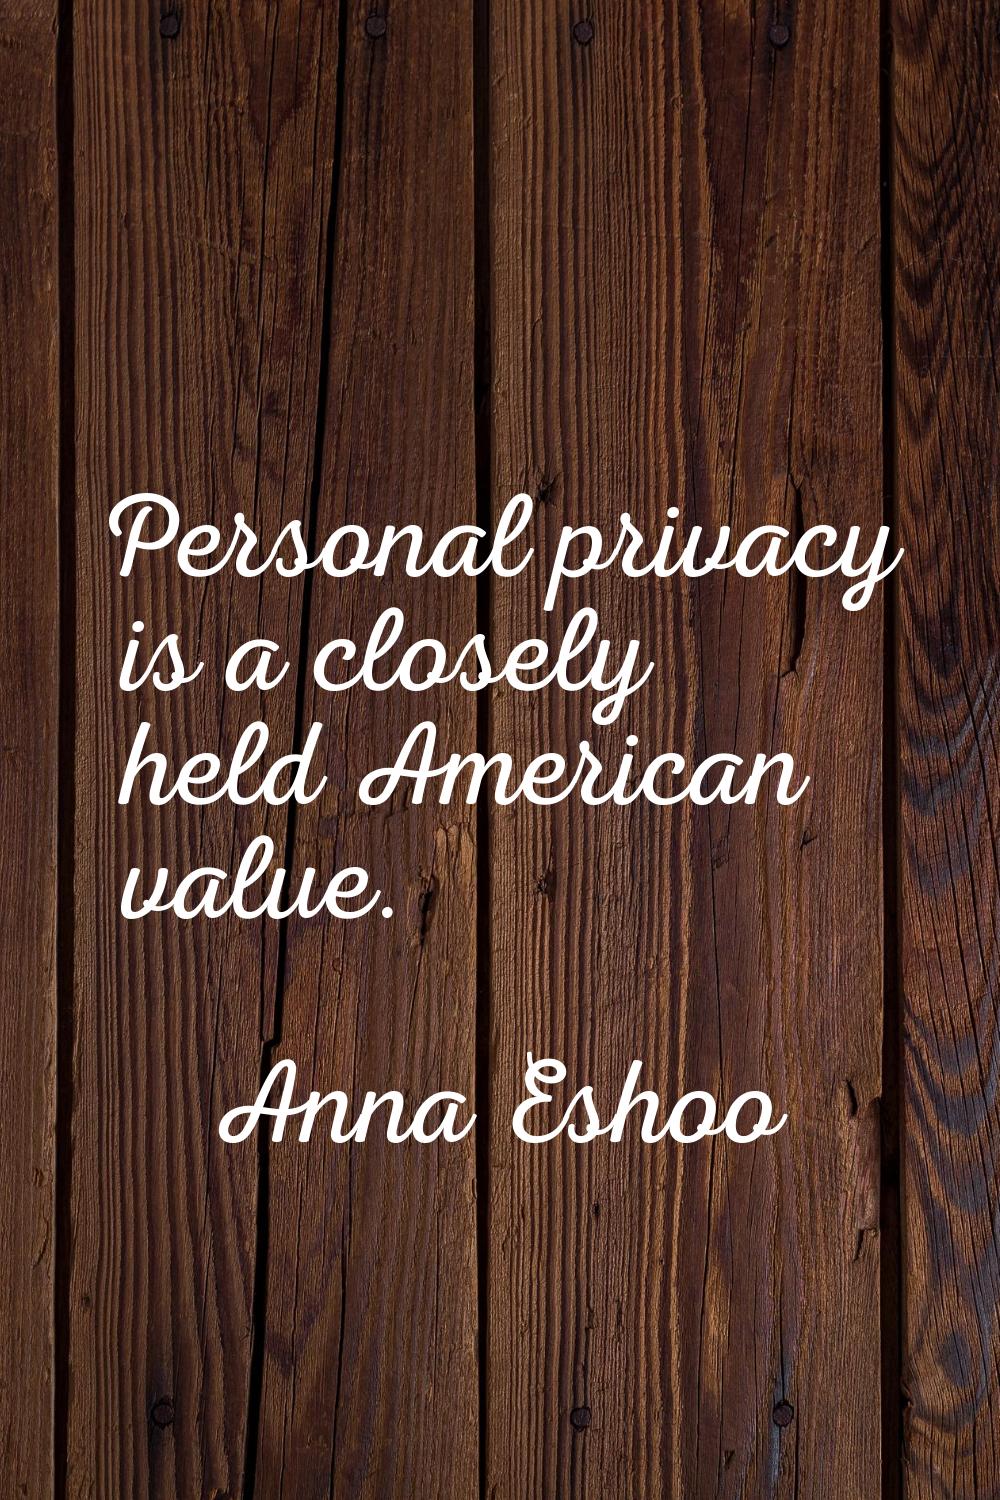 Personal privacy is a closely held American value.